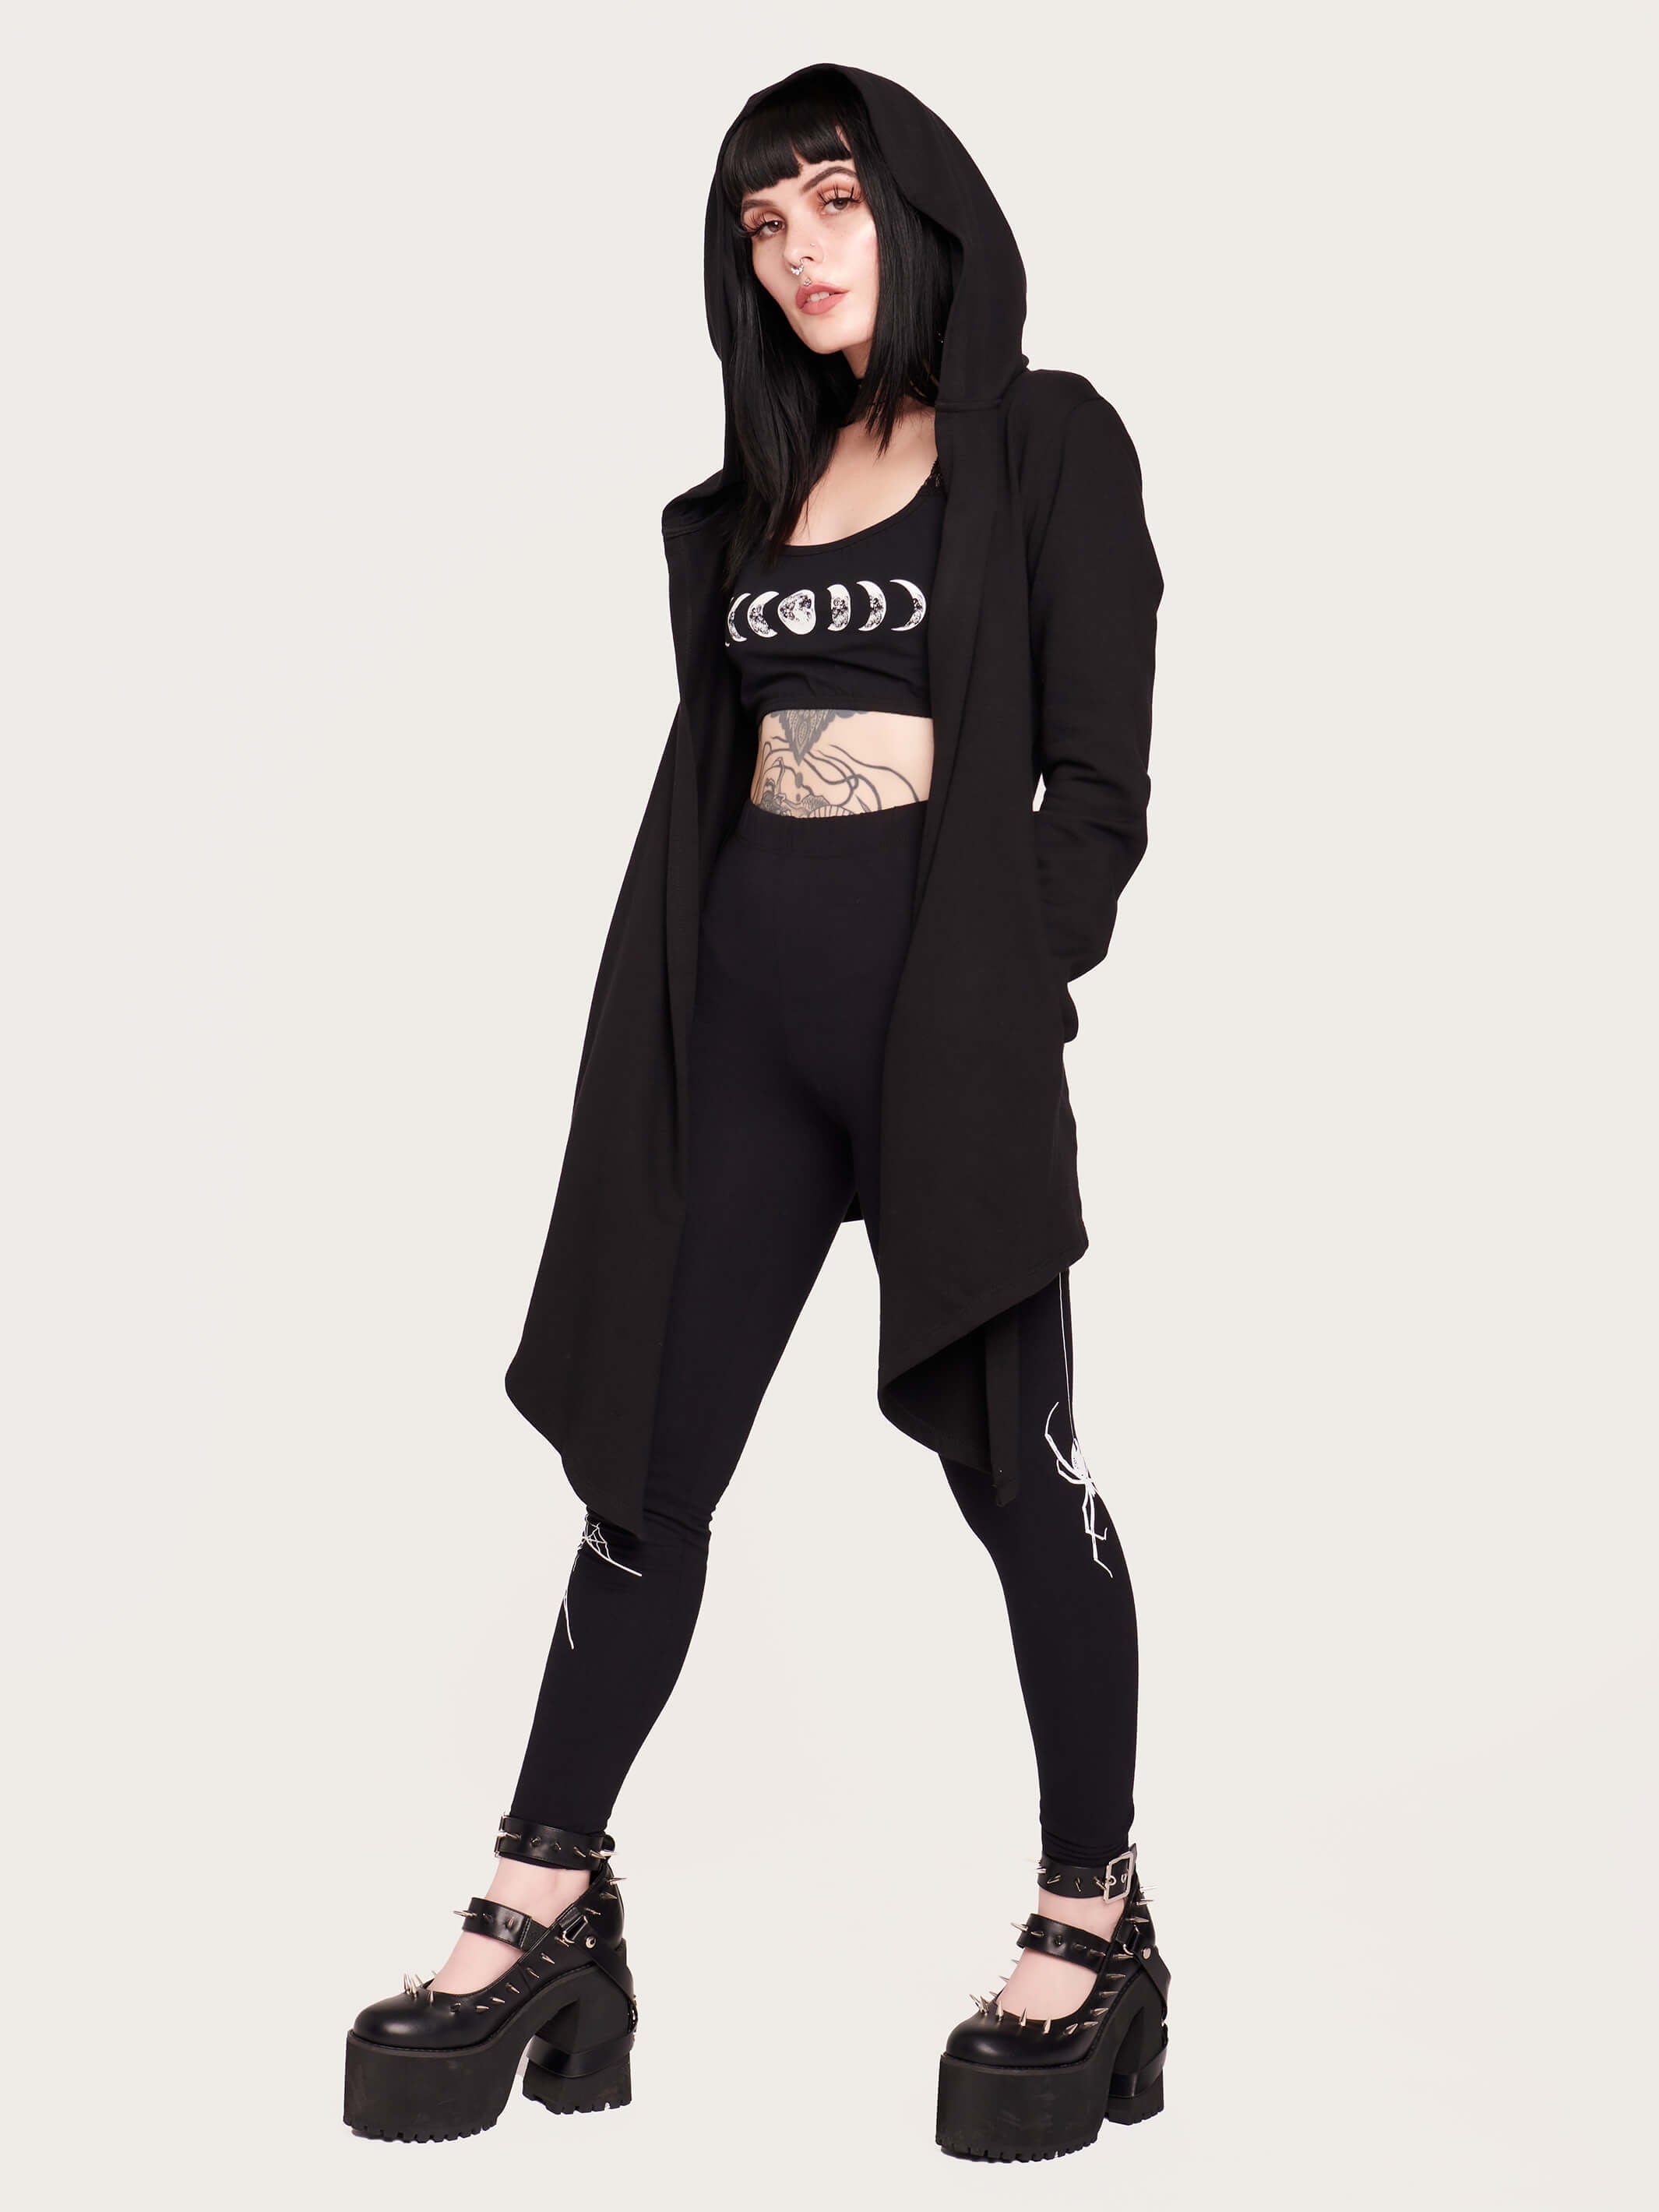 Tap into some voodoo vibes with this embroidered spinal back detail on our french terry hooded cloak. Crescent moon & rose embroidery on the front. Assymetrical hem with pockets. Goth grunge fashion, alt girl fashion, goth clothing, summer goth, skull top, goth punk top, egirl fashion, emo fashion.